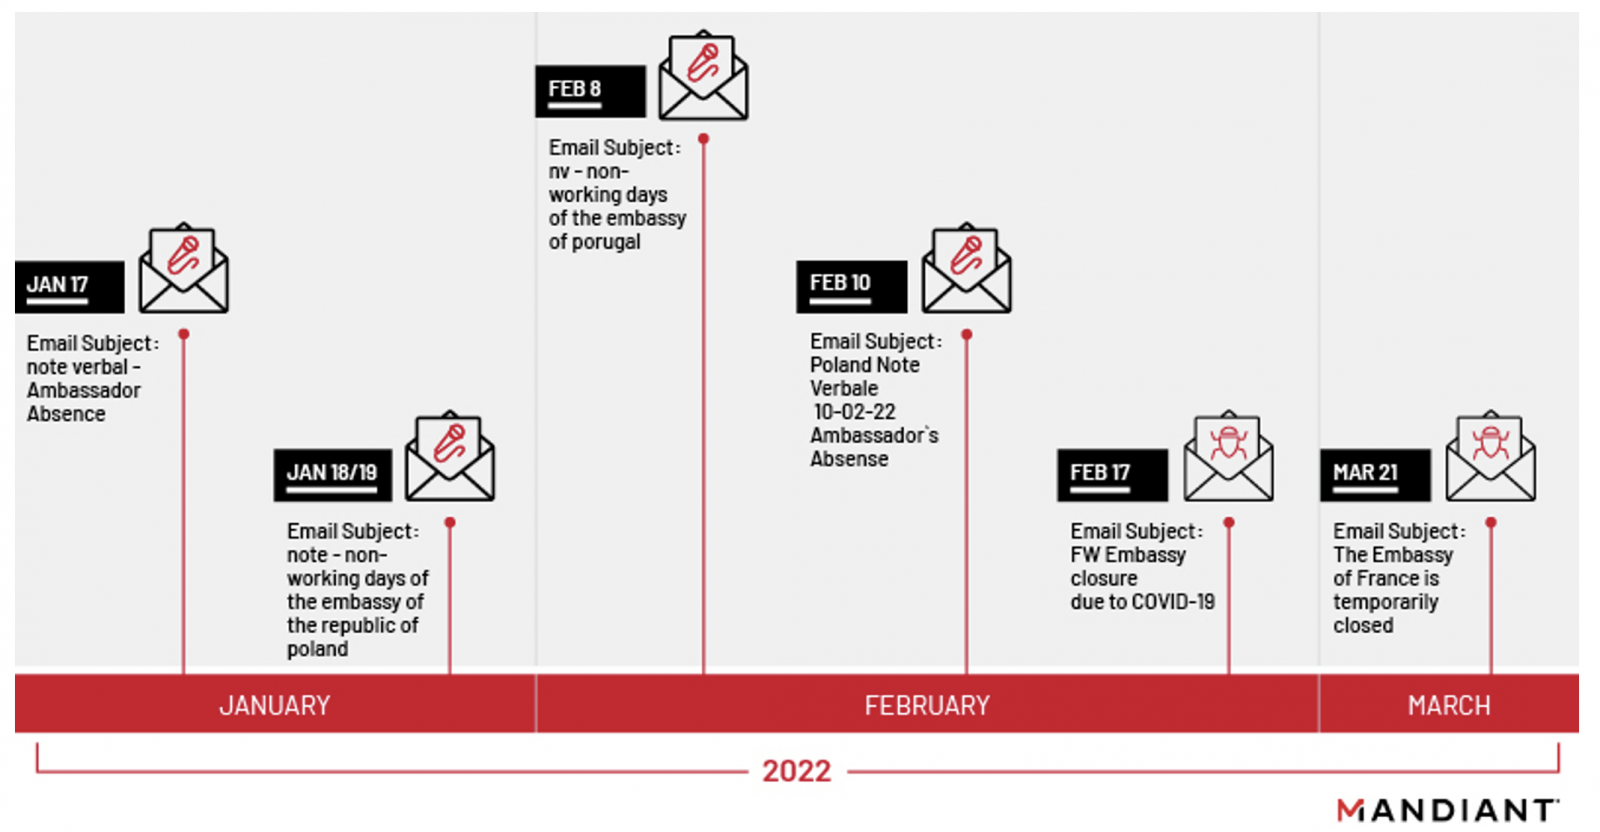 Phishing campaign timeline